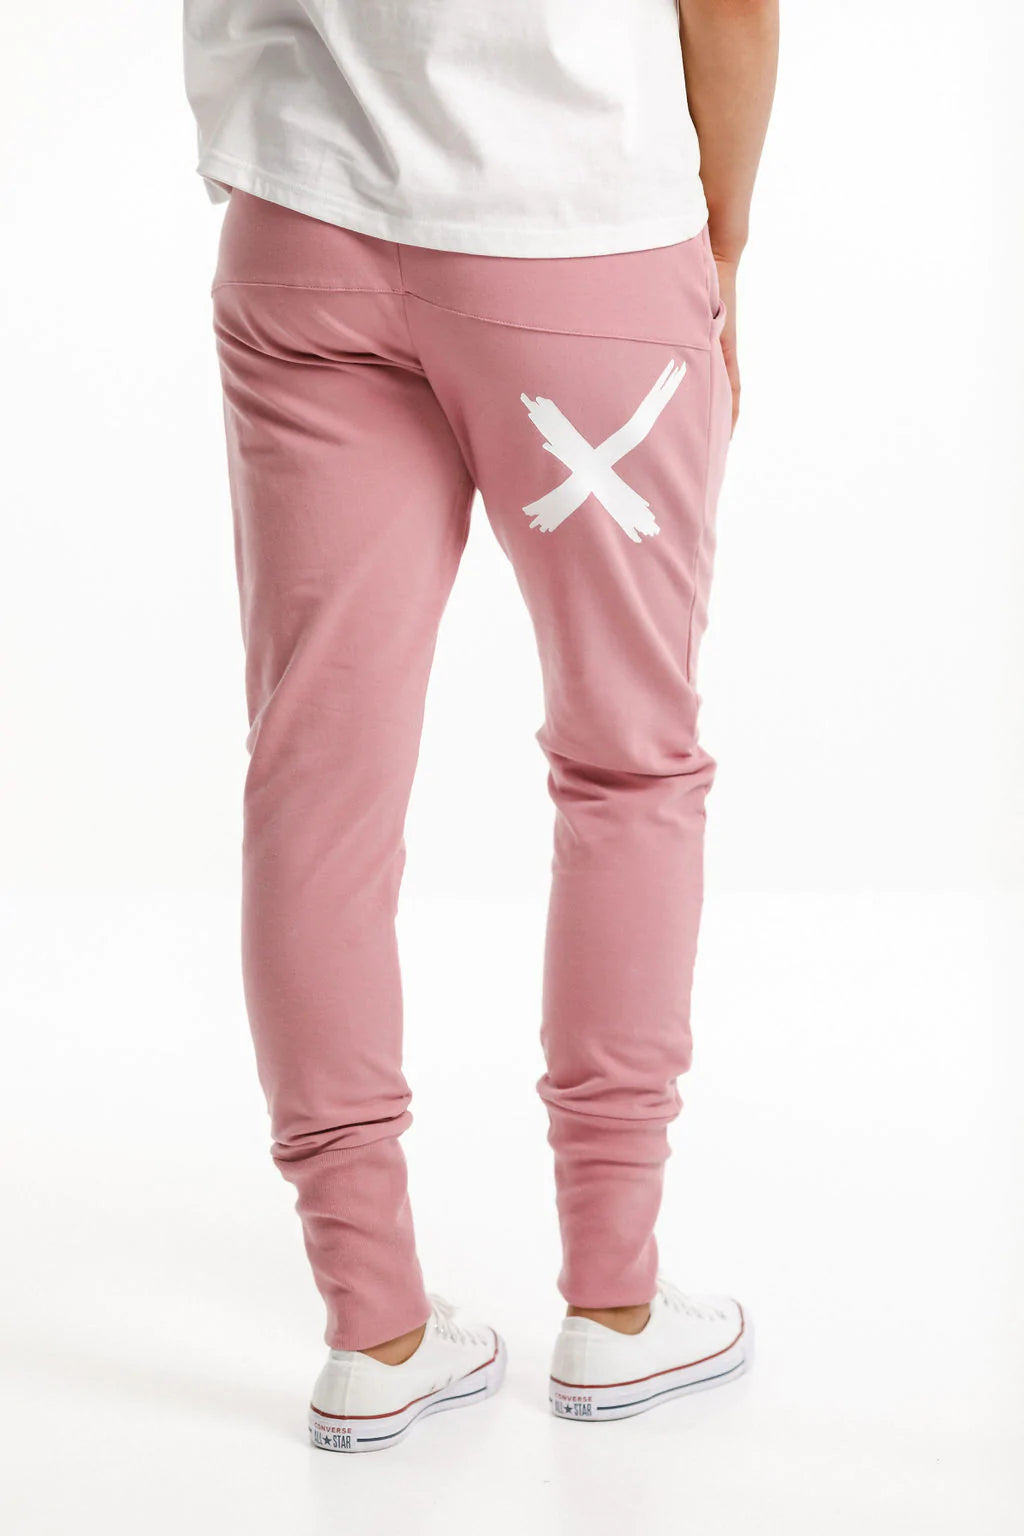 Homelee Apartment Pants - Rosebud with White X